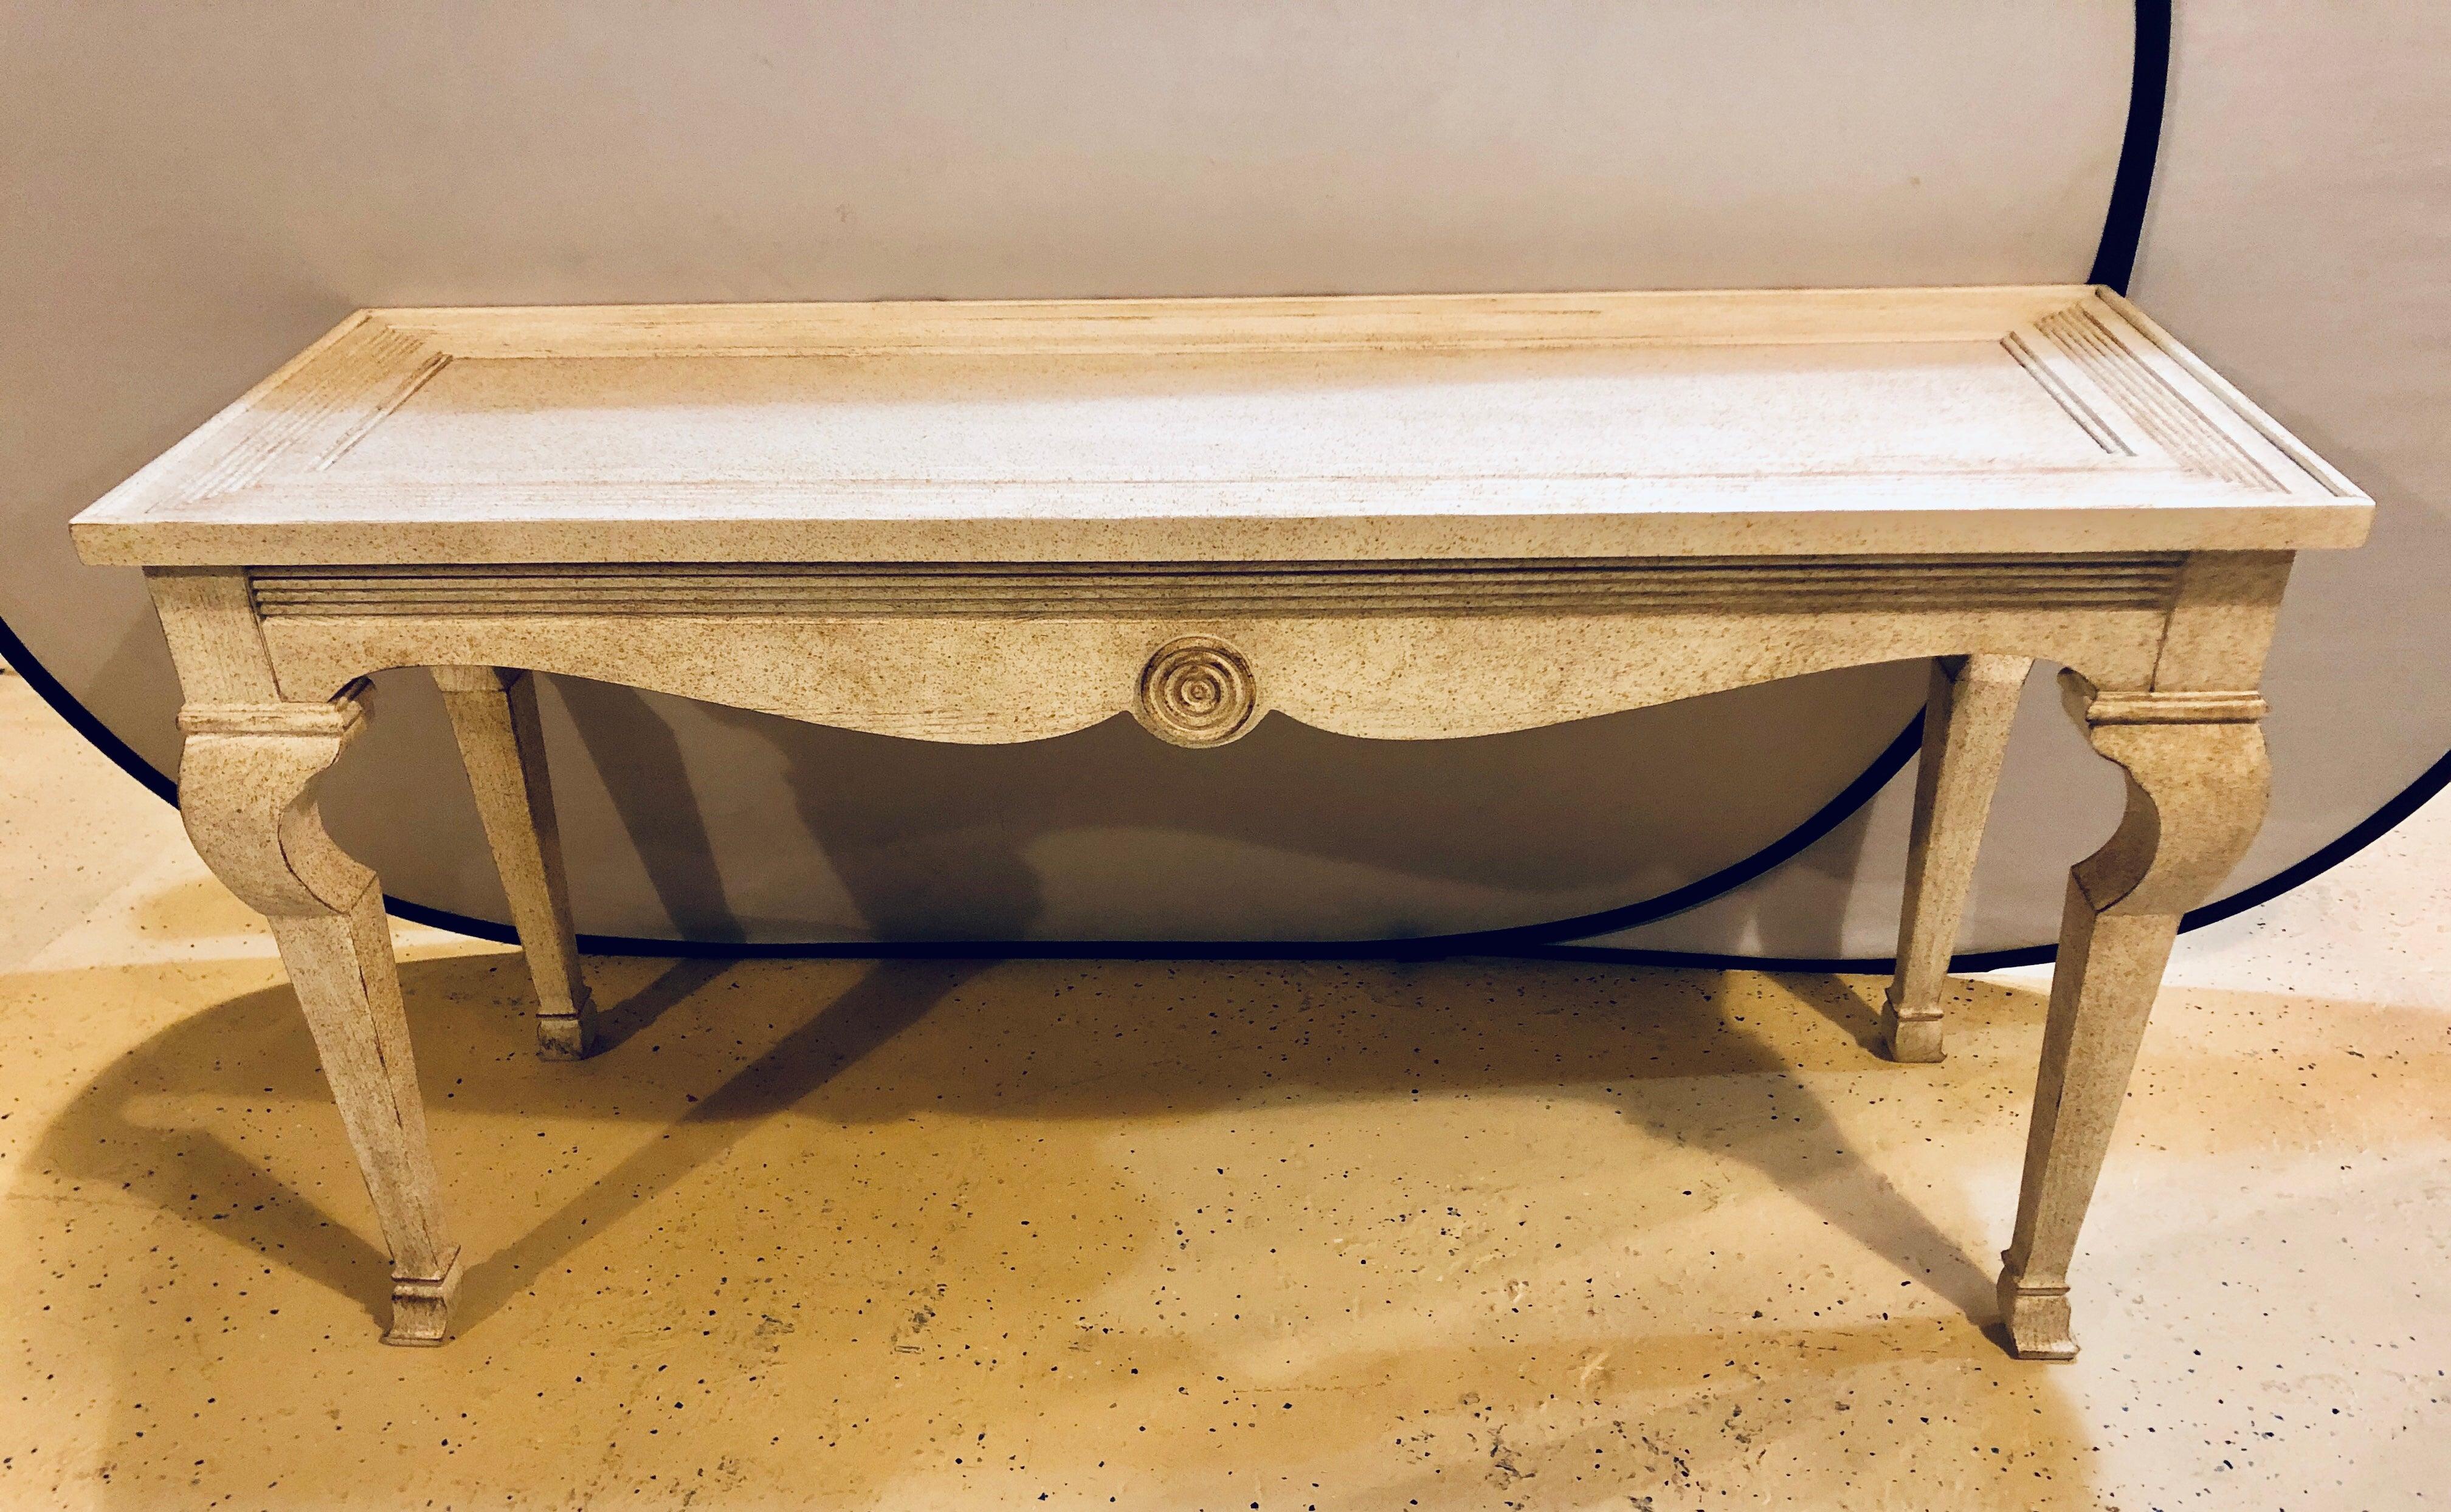 A pair of handcrafted quality Hollywood Regency style center console tables in a pickled off-white distressed finish. Each having the exact same look and design on all sides. This simply stunning pair of console or sofa sideboards are certain to